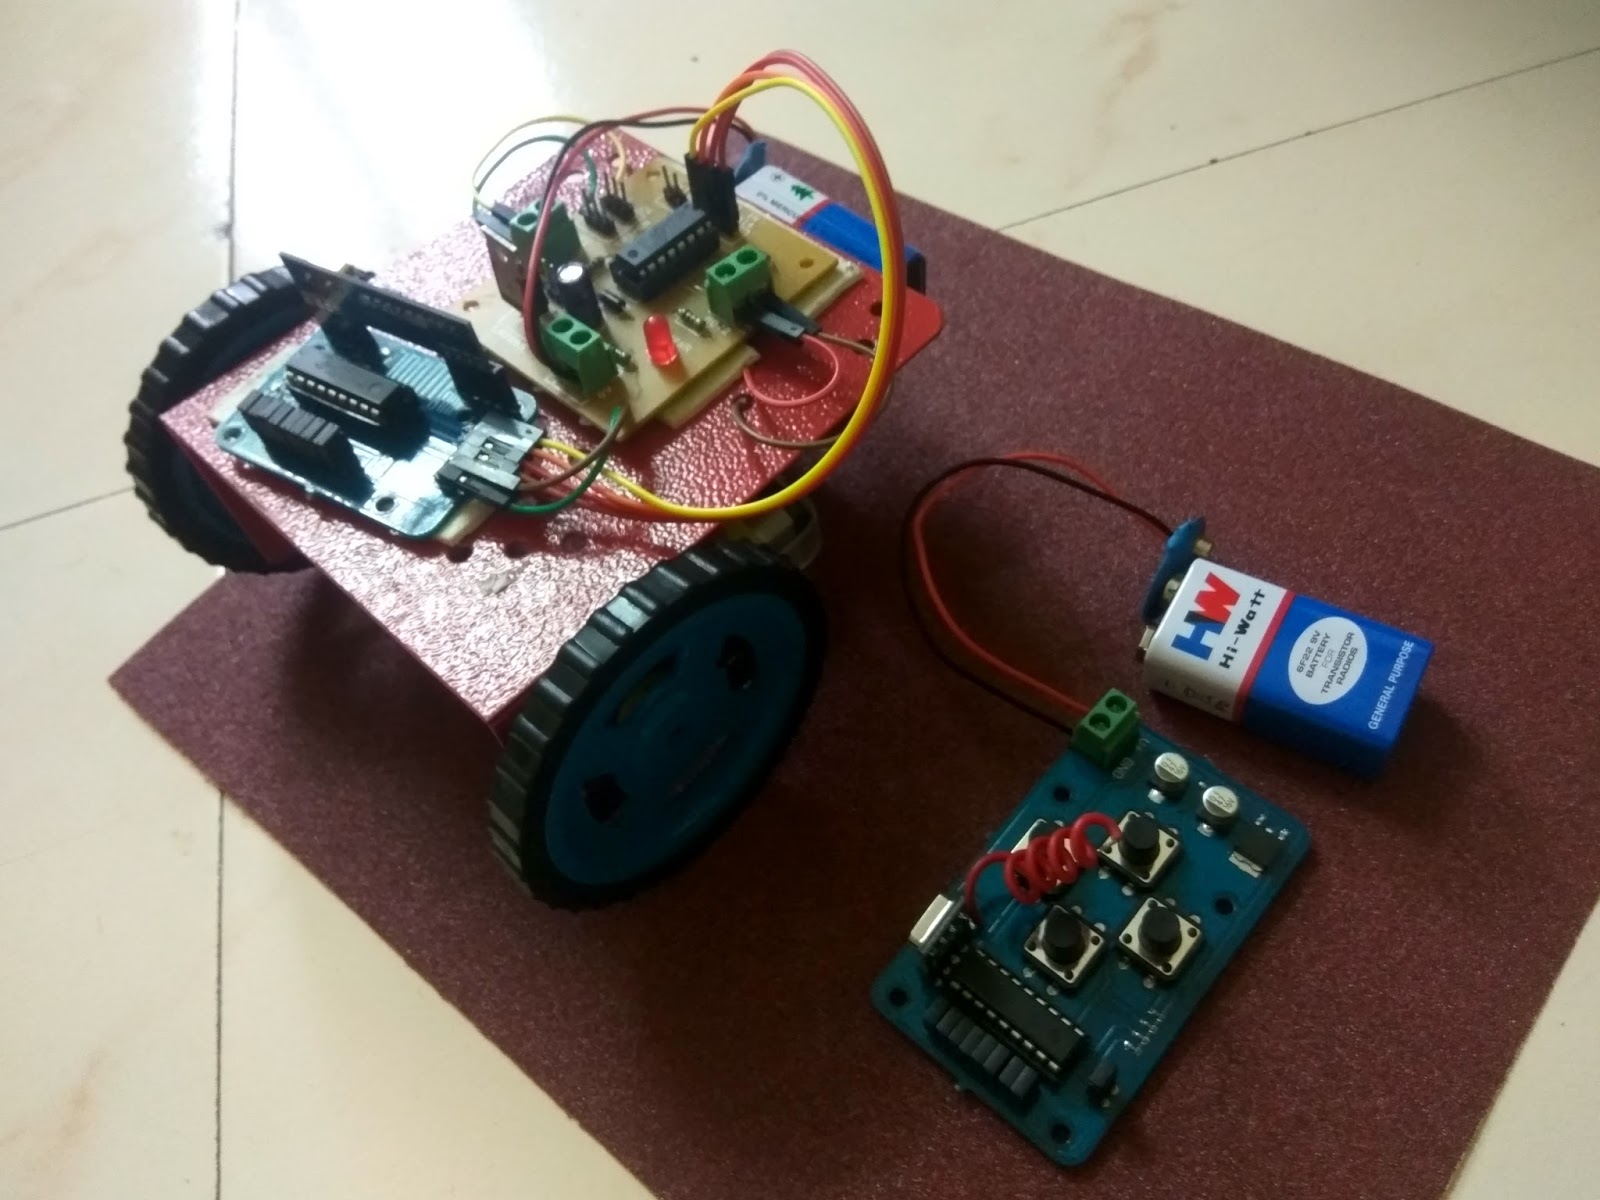 Cprohack: C Programming: How to make simple remote control car with Android app